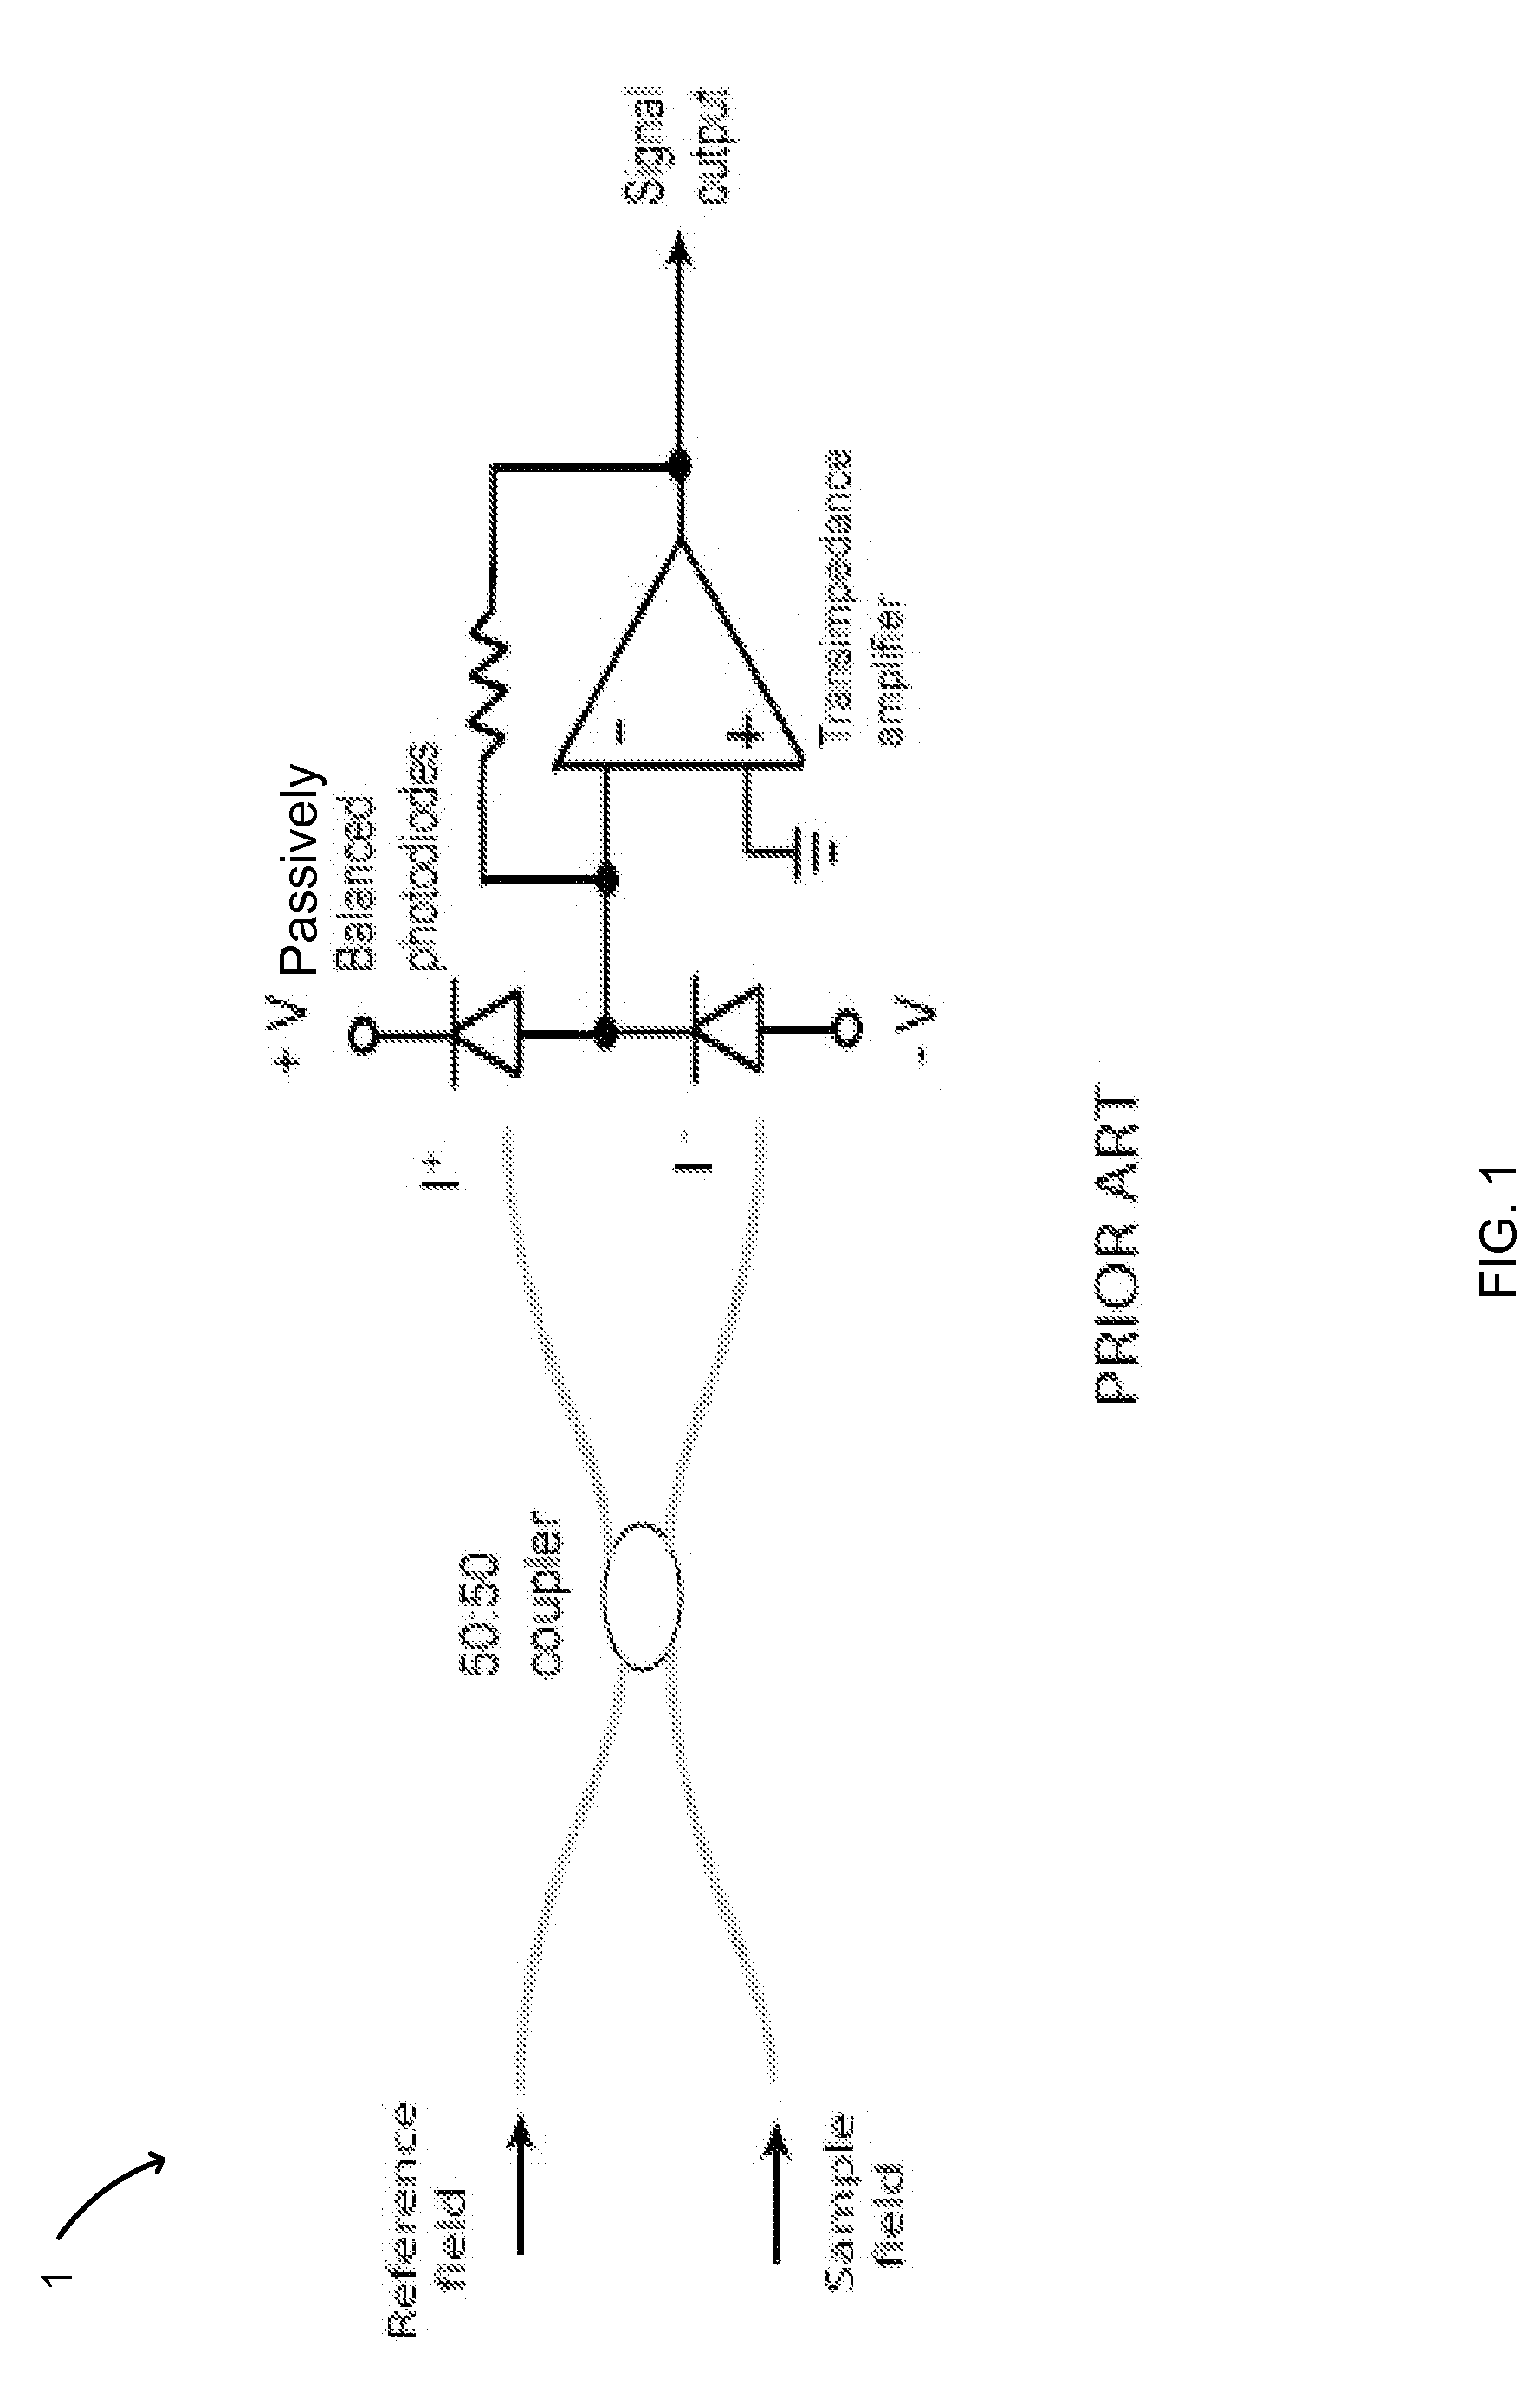 Intensity Noise Reduction Methods and Apparatus for Interferometric Sensing and Imaging Systems